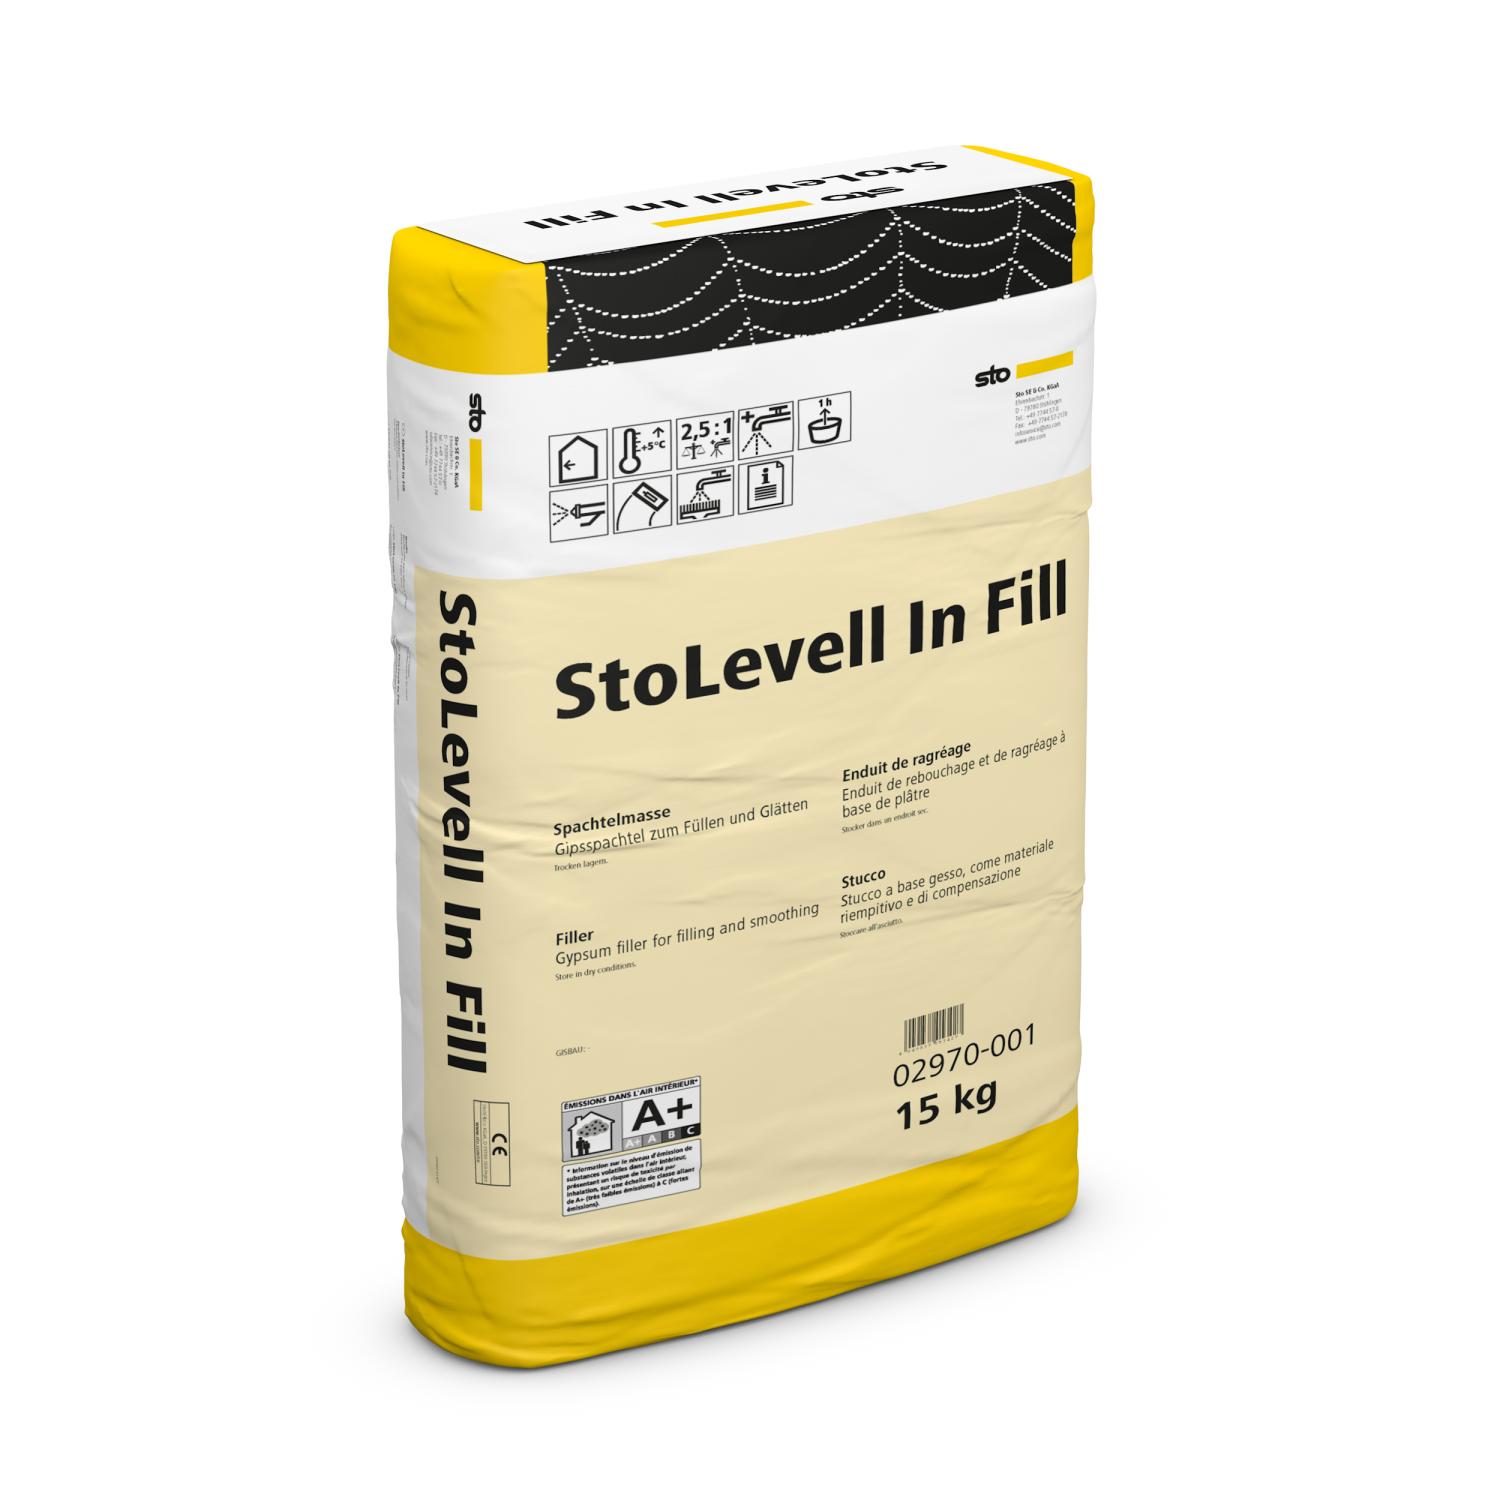 StoLevell In Fill - 15 kg Sack